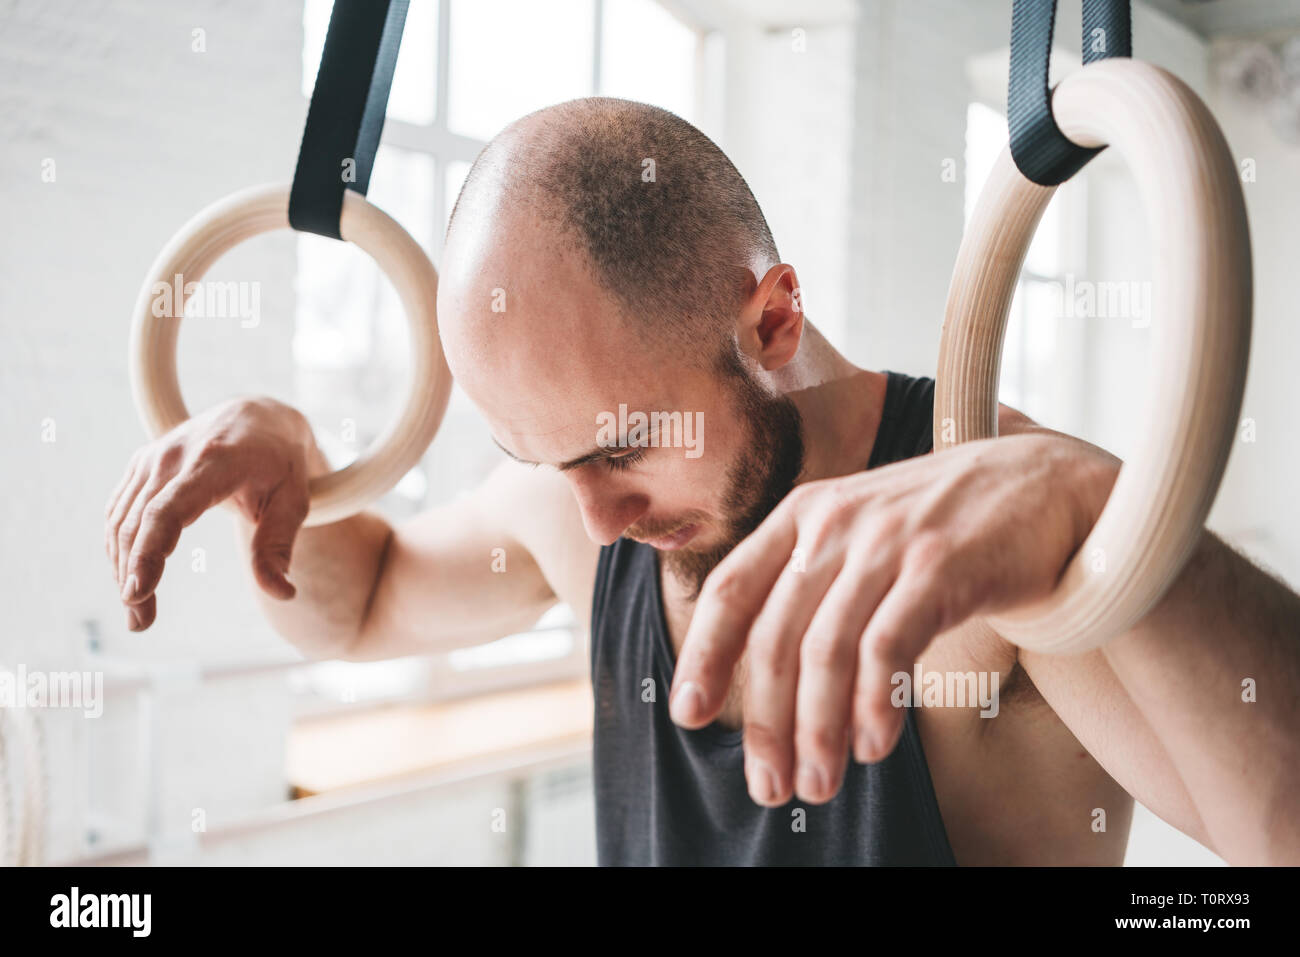 Tired Handsome Strong Man Holding On To Gymnastic Rings At